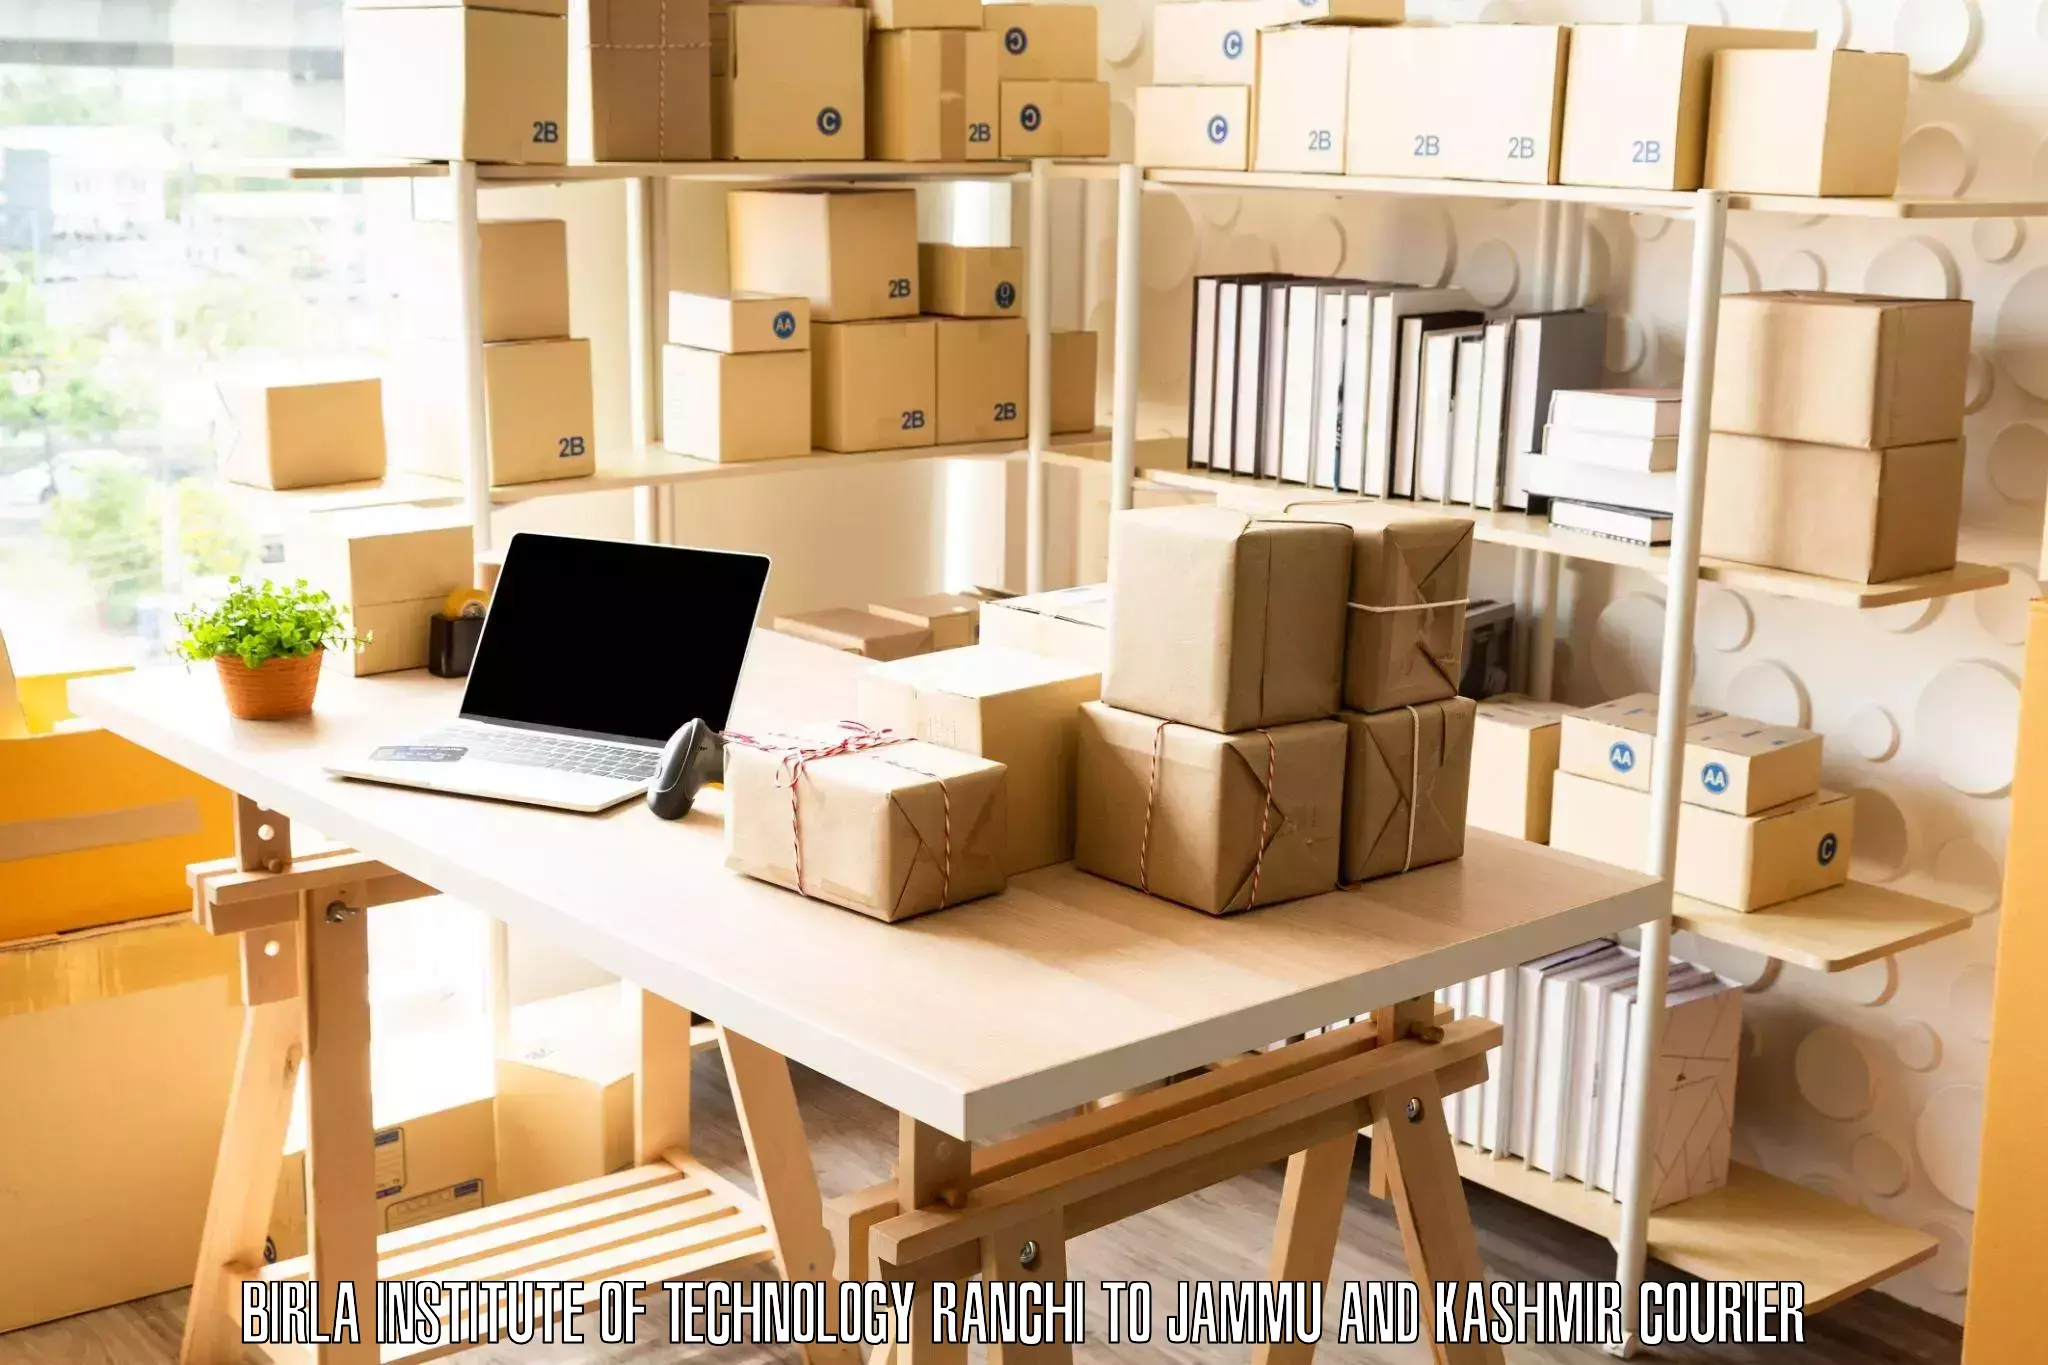 Efficient relocation services Birla Institute of Technology Ranchi to Jammu and Kashmir